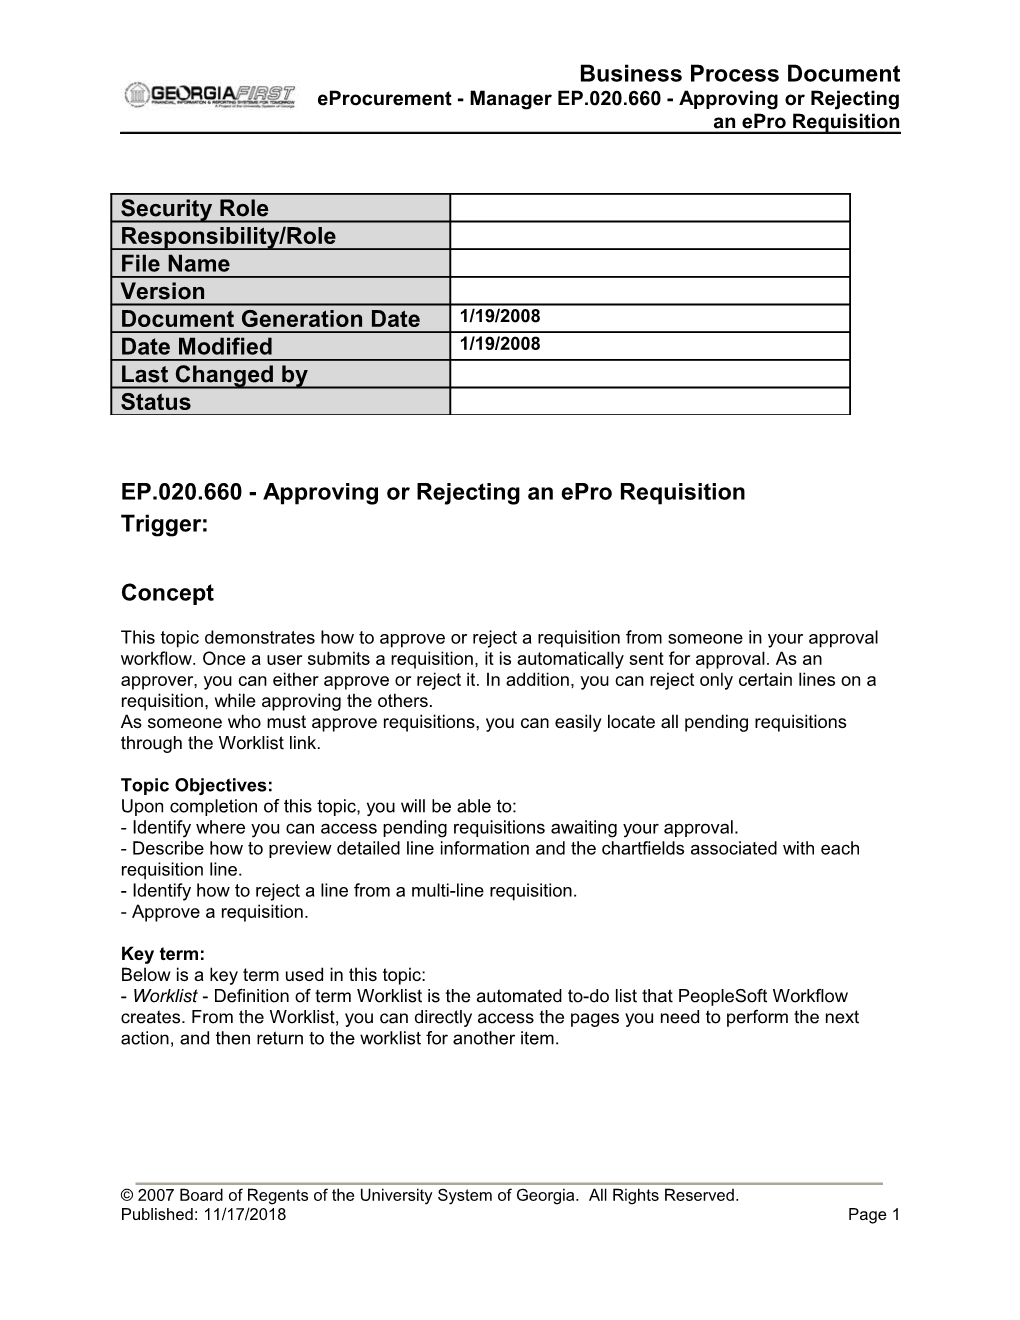 EP 020 660 - Approving Or Rejecting an Epro Requisition